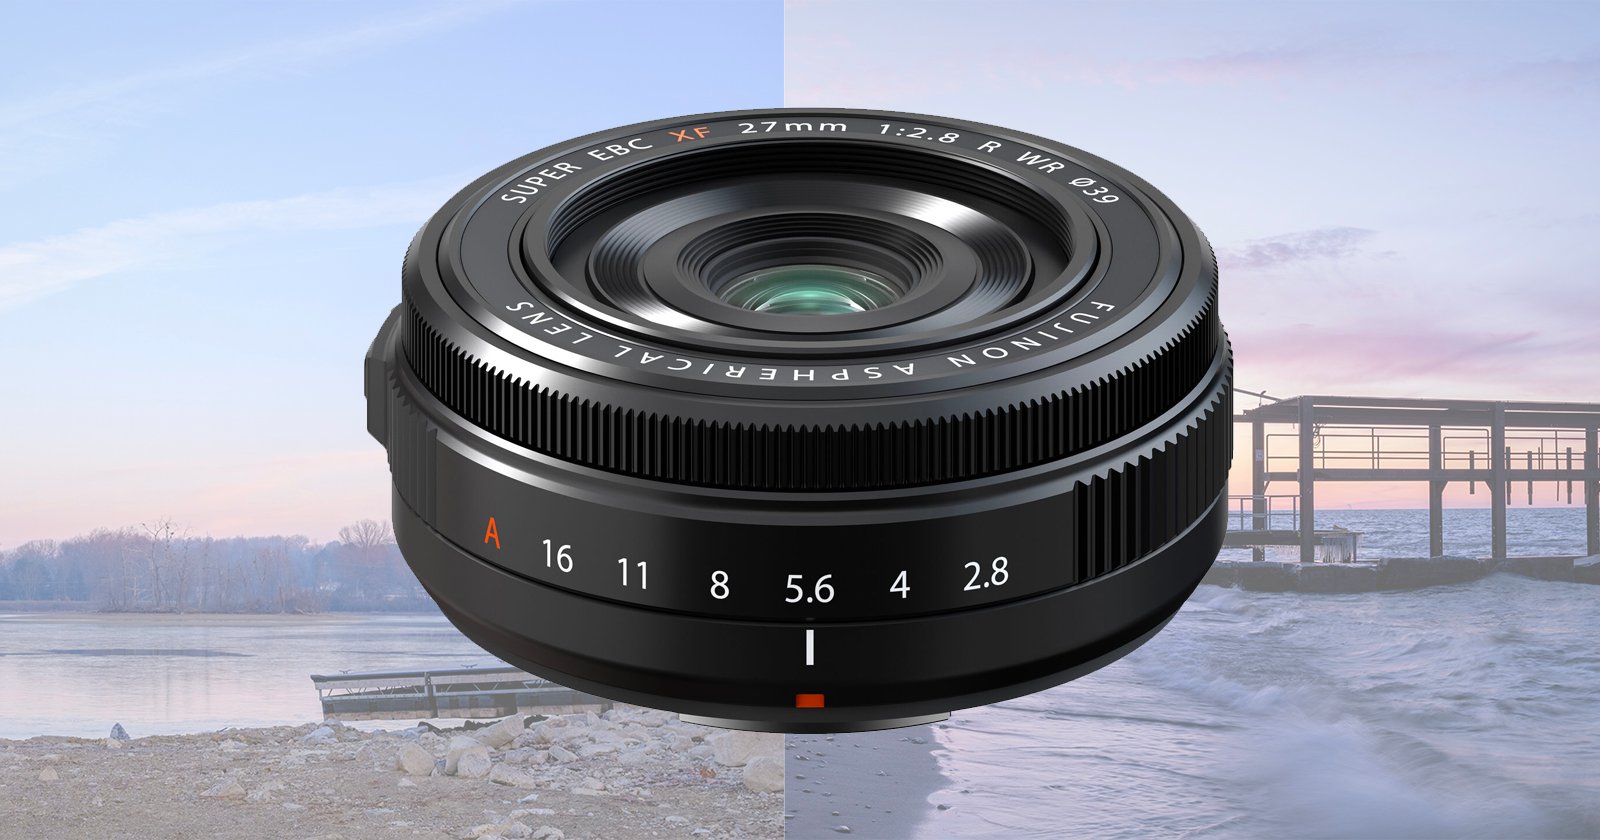 First Impressions of the Fujifilm XF 27mm f/2.8 Pancake Lens